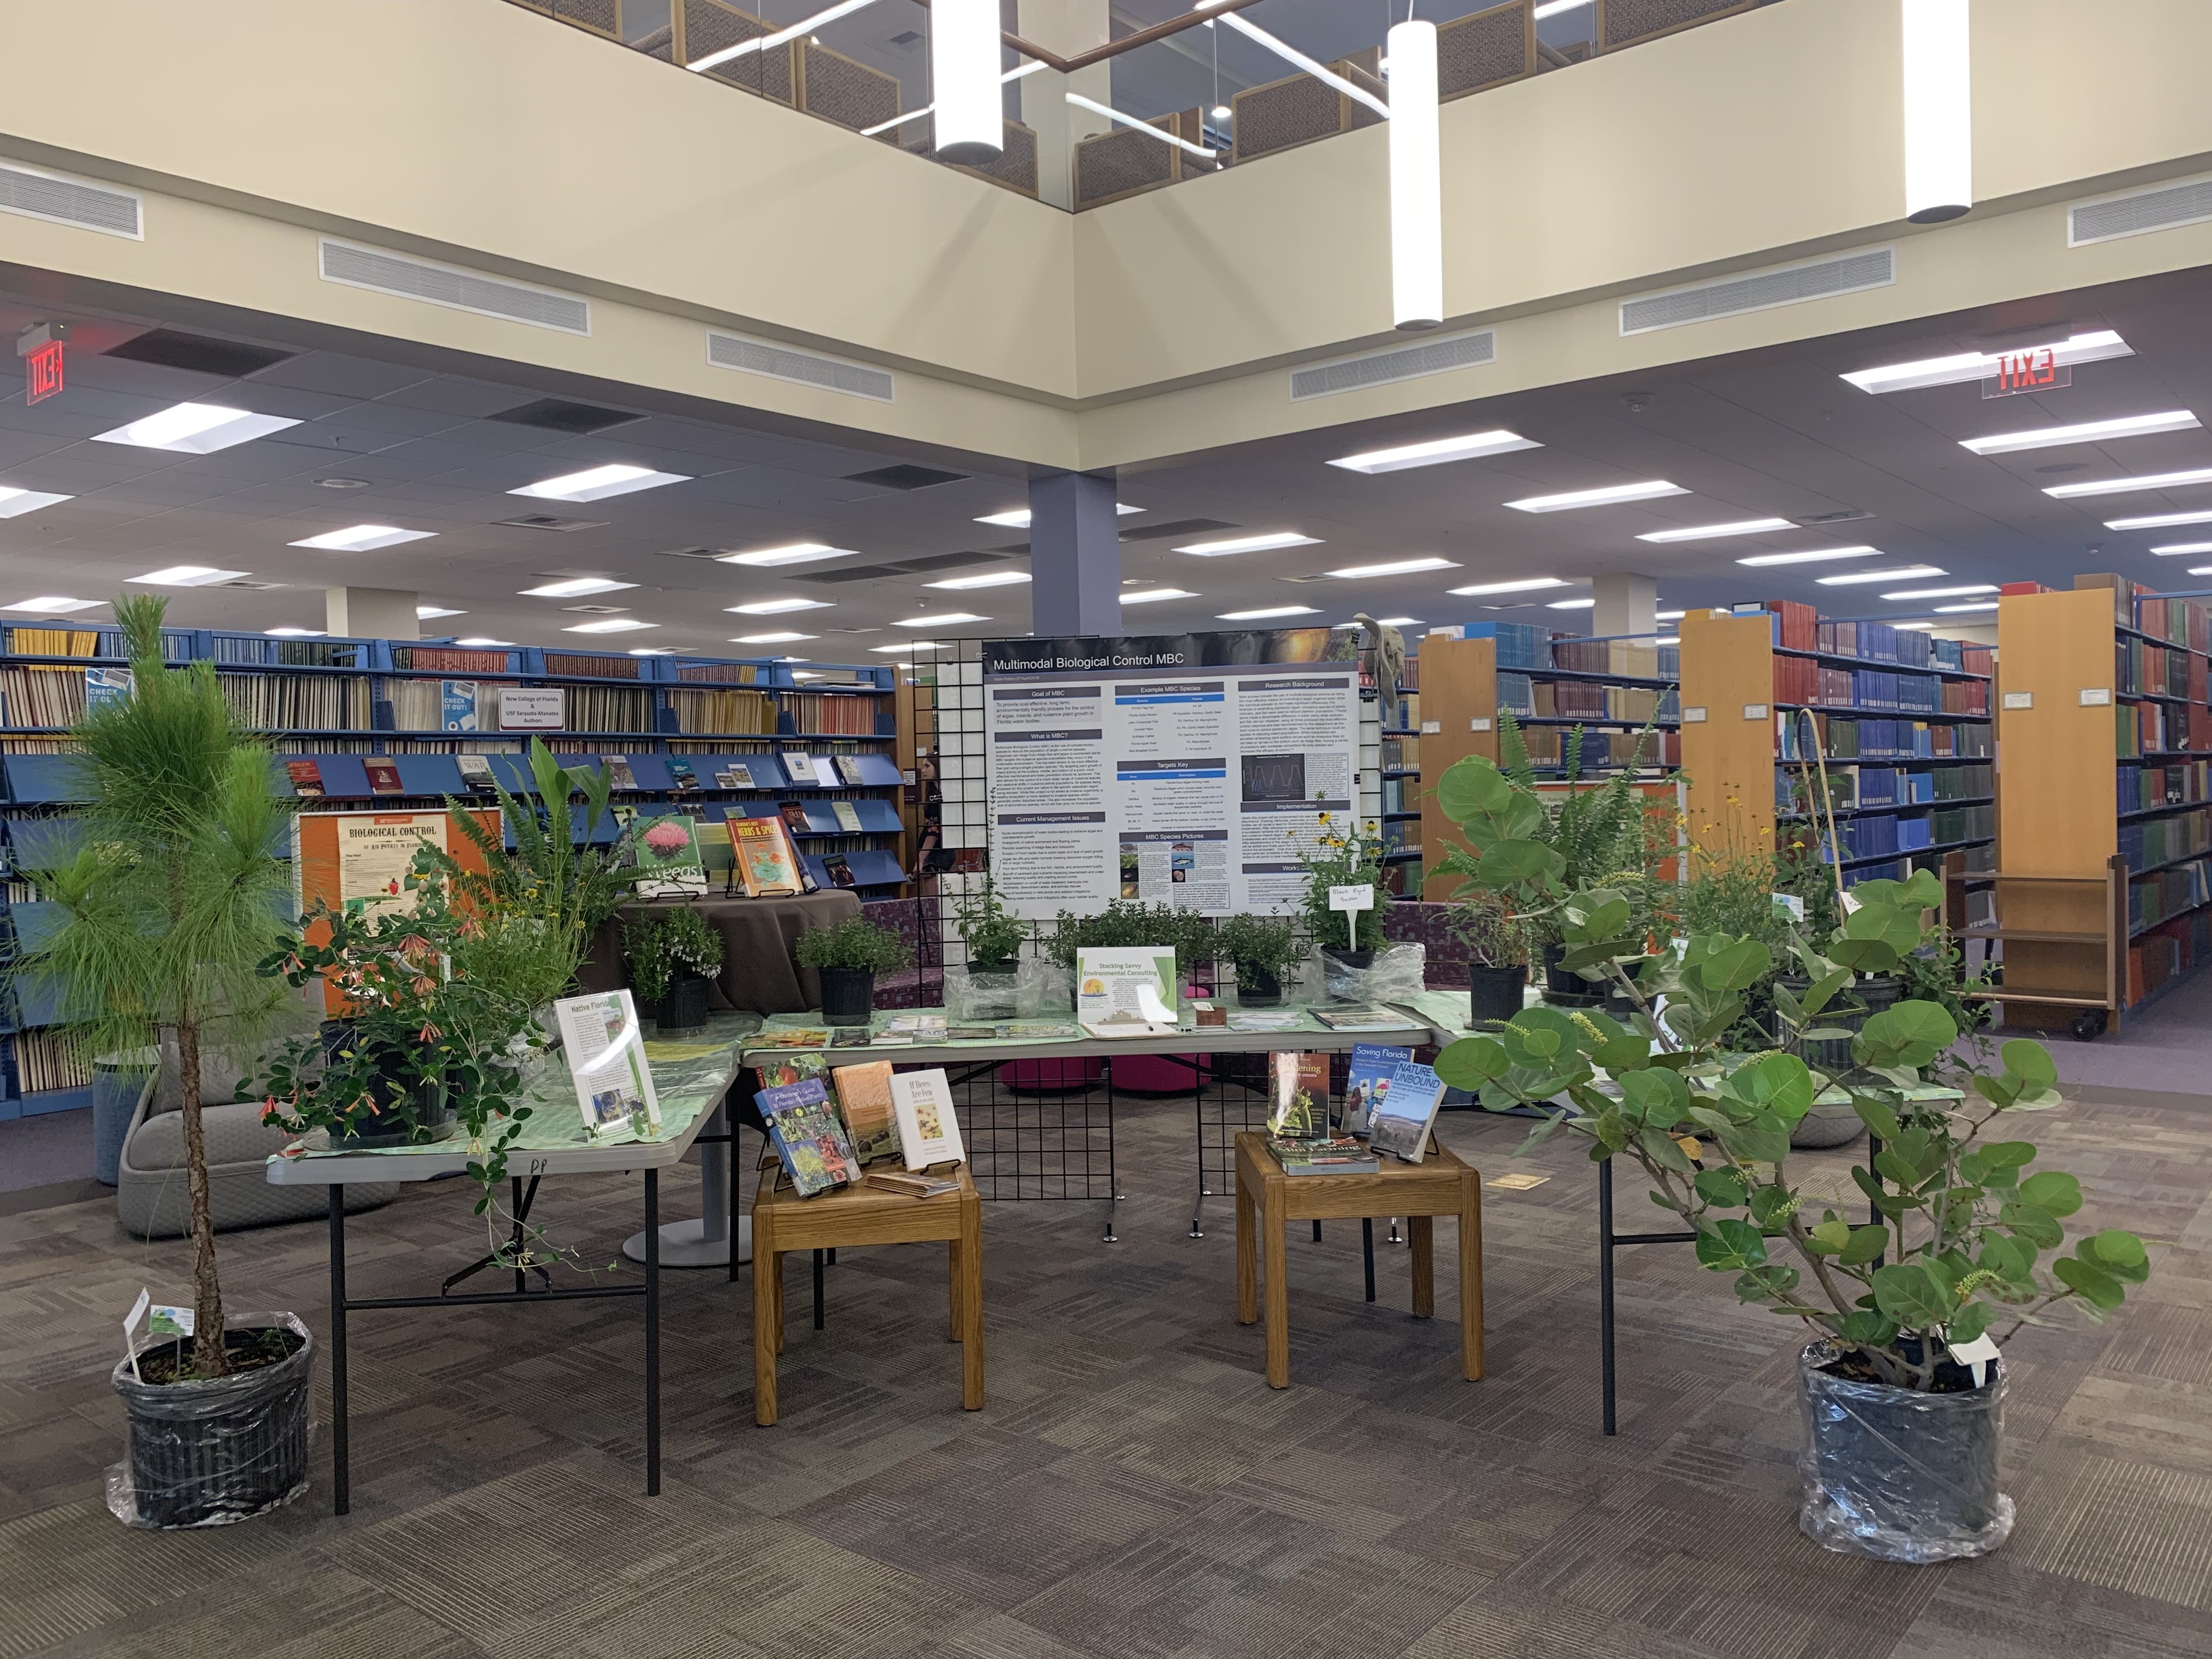 Plants and ideas growing at the Library